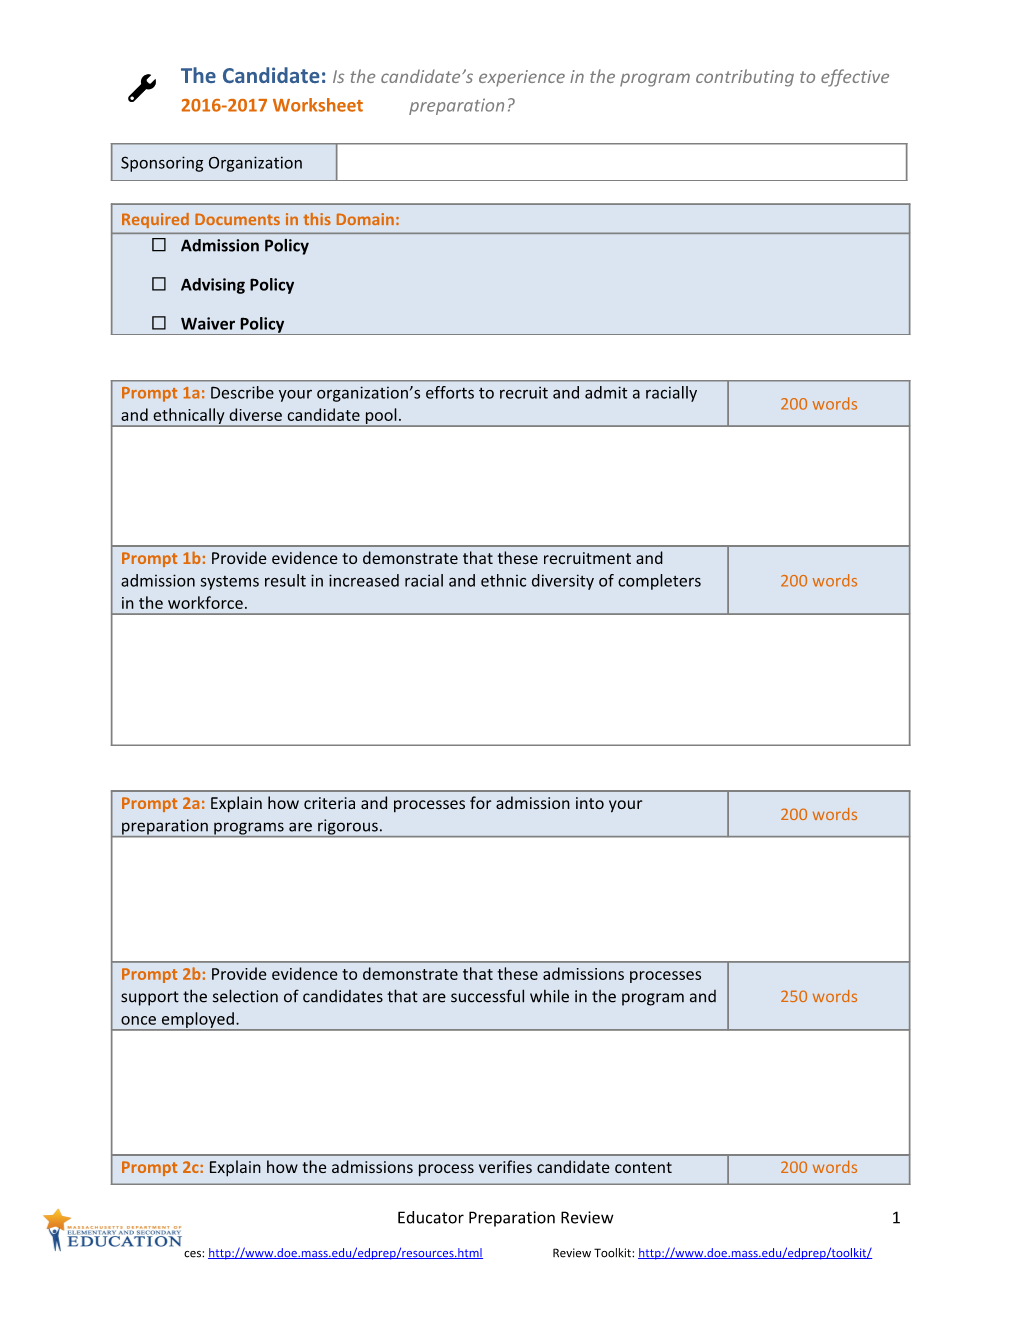 2016-2017 Educator Preparation Review the Candidate Worksheet